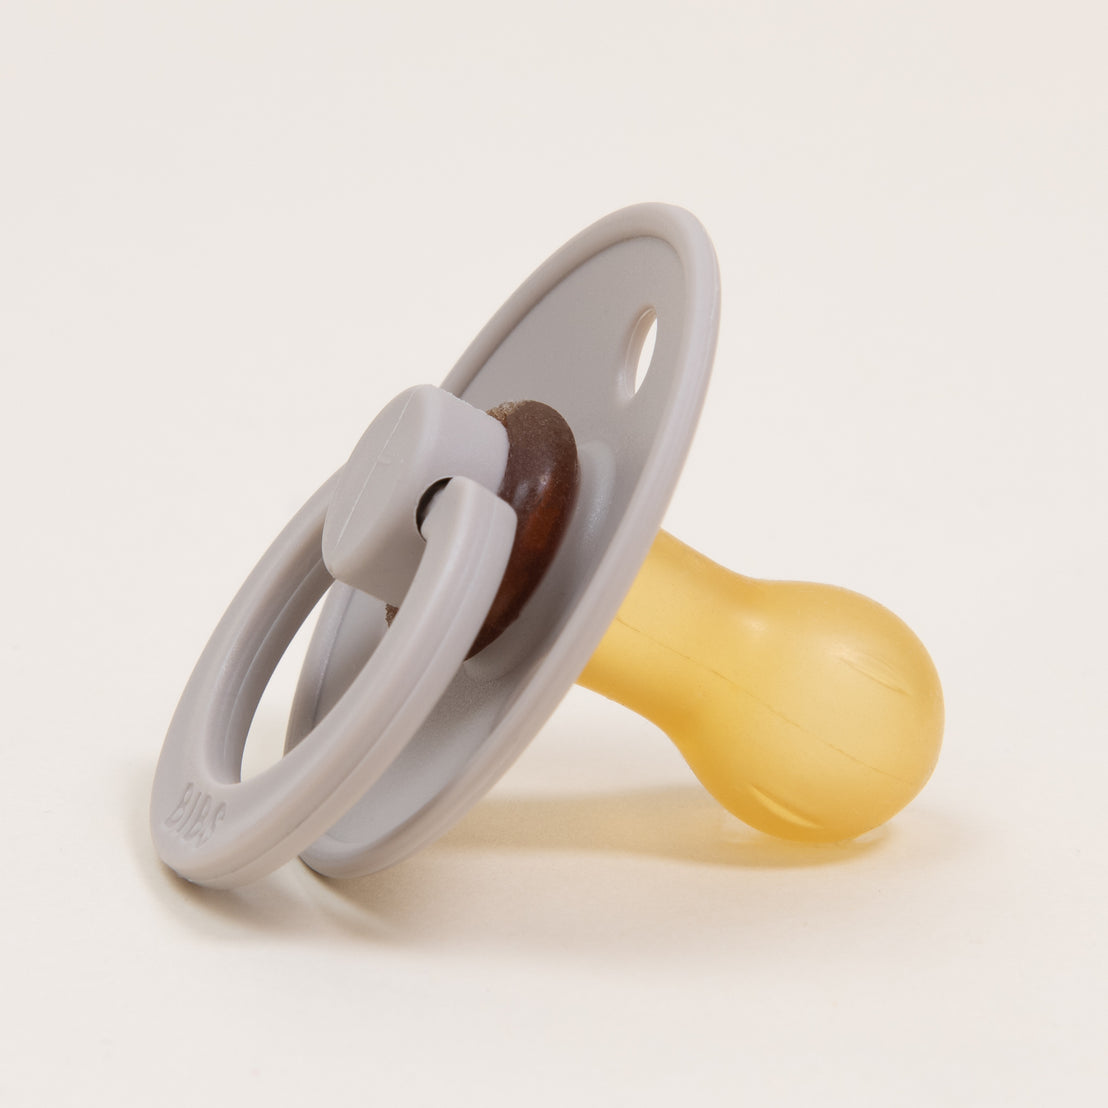 A Bibs Pacifier in Sand with a sand-colored handle and a yellow nipple on a white background.